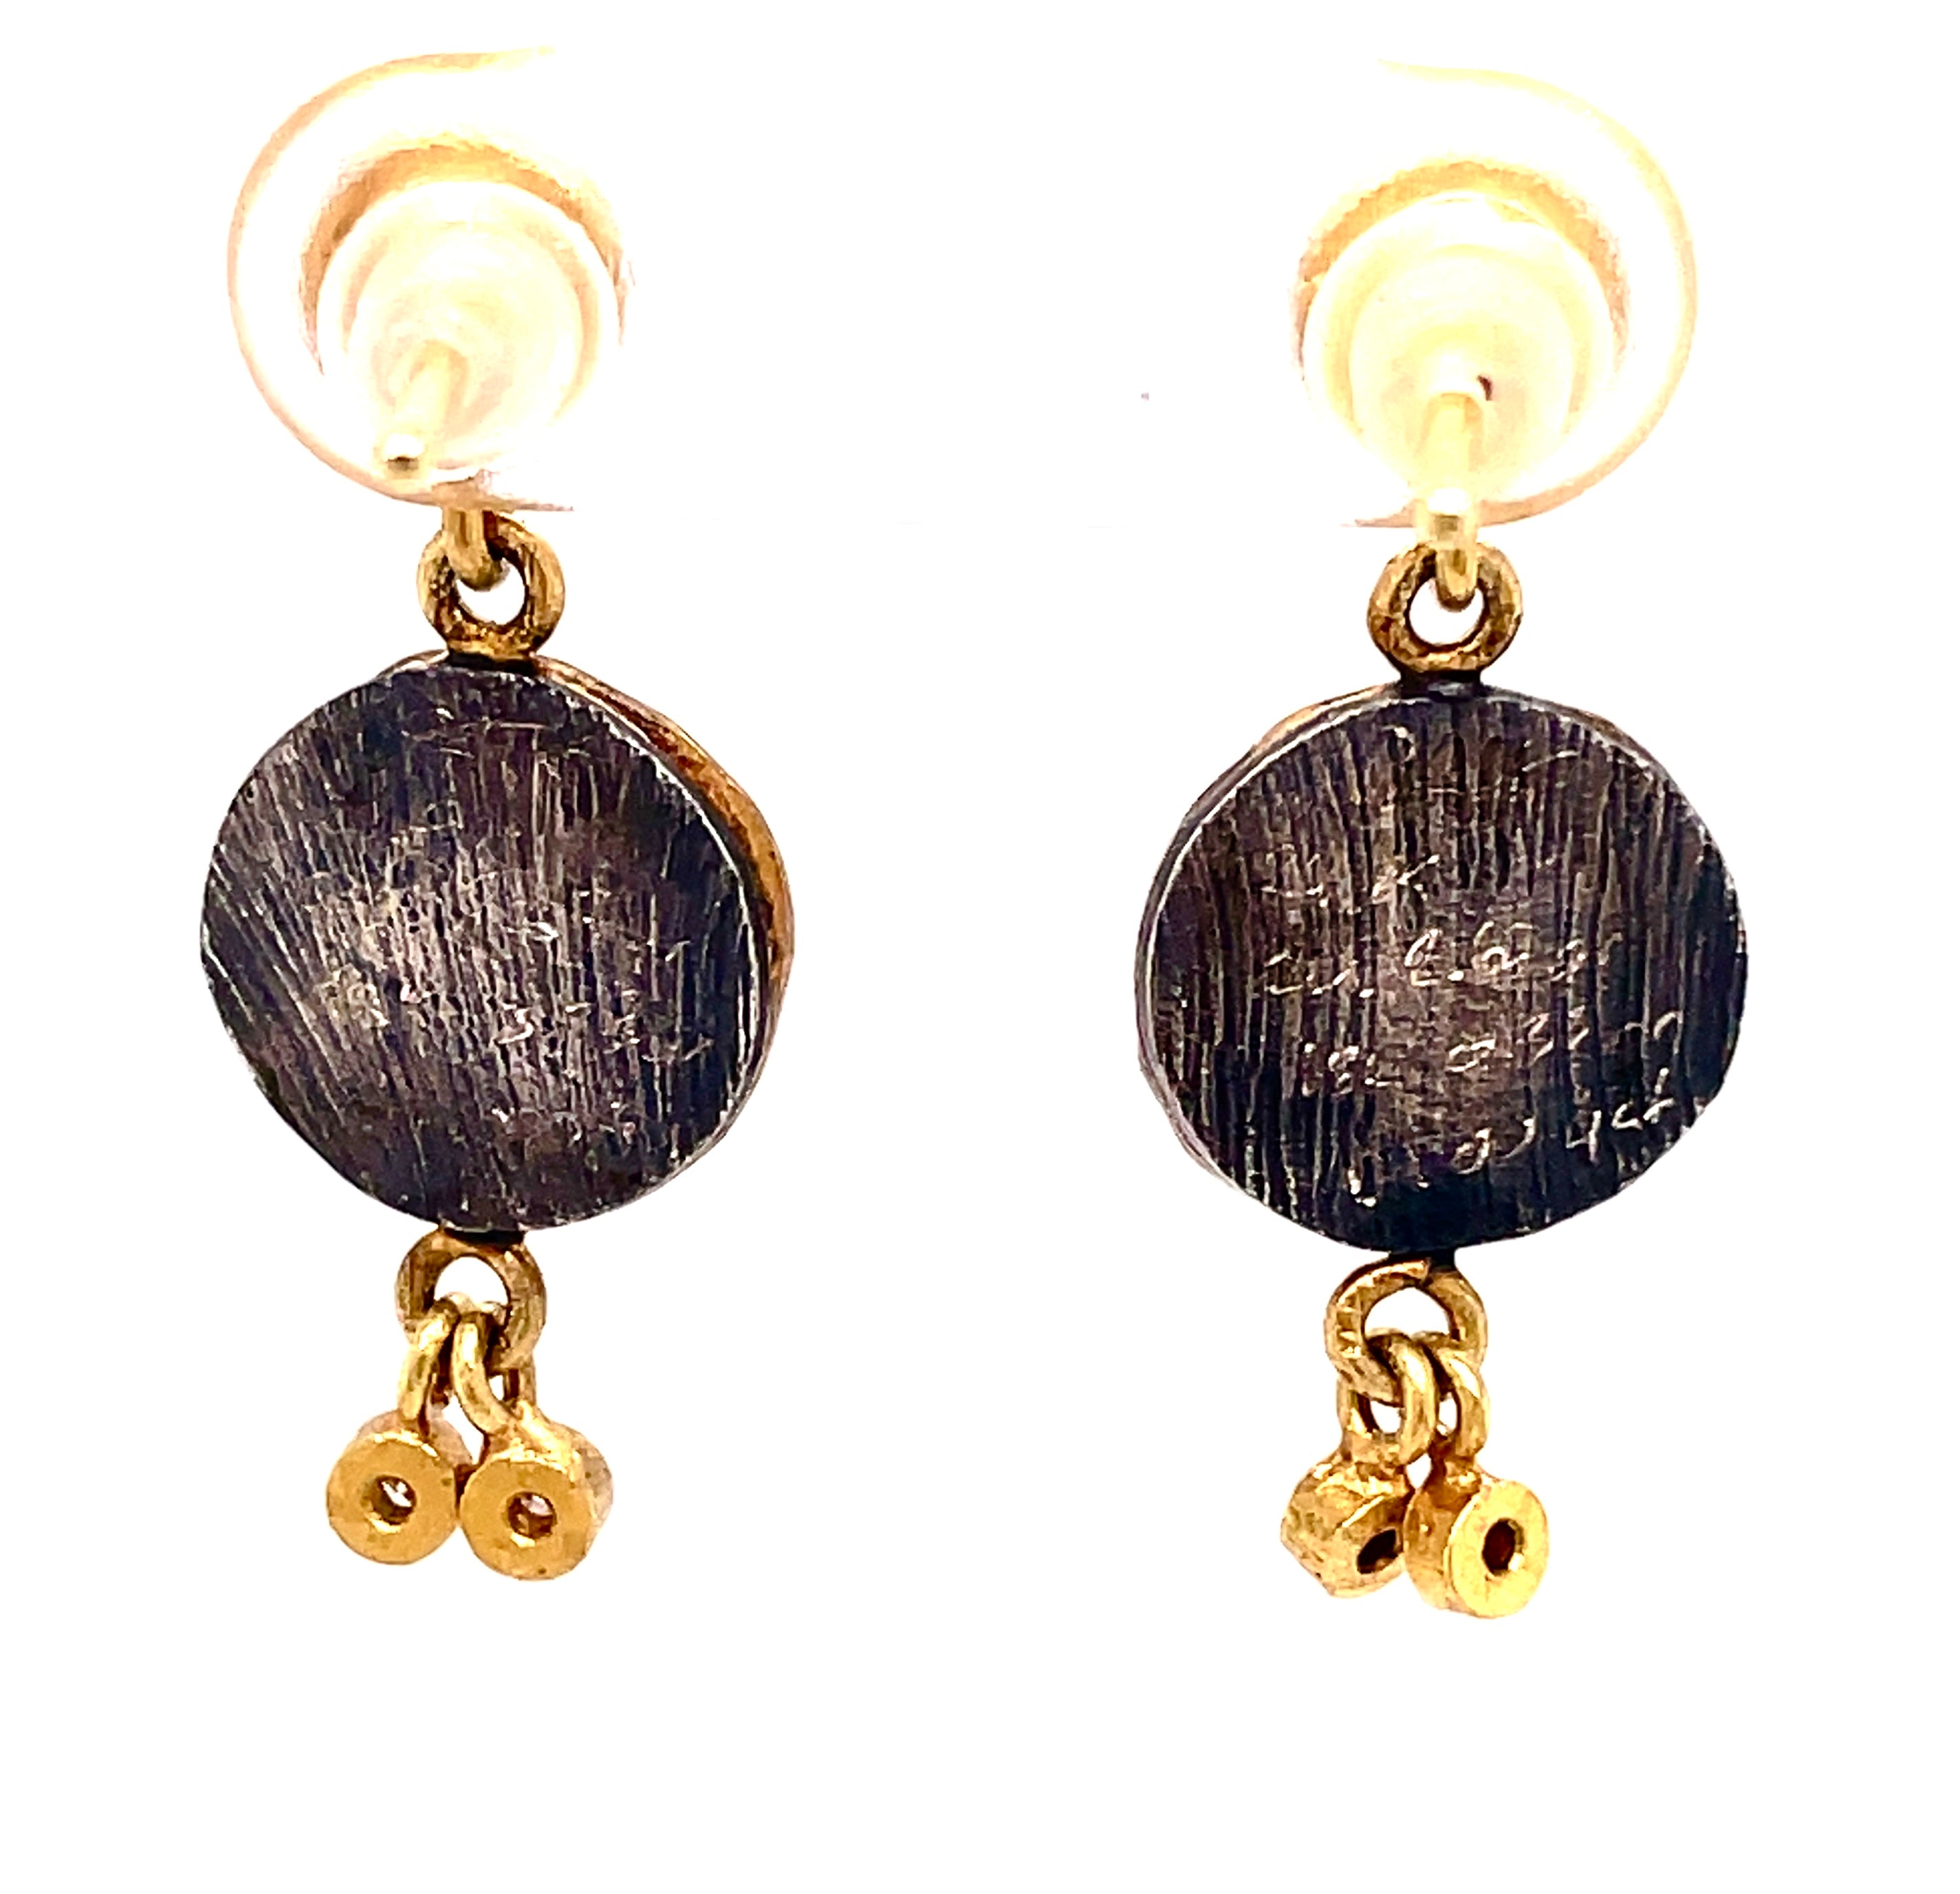 Featuring Turkish craftsmanship, these 26mm earrings boast a combination of 24K yellow gold and oxidized sterling silver. Each earring is embellished with two small round diamonds, the discs evoke the duality of the Istros coins which were once used as theater tickets in Ancient Rome.